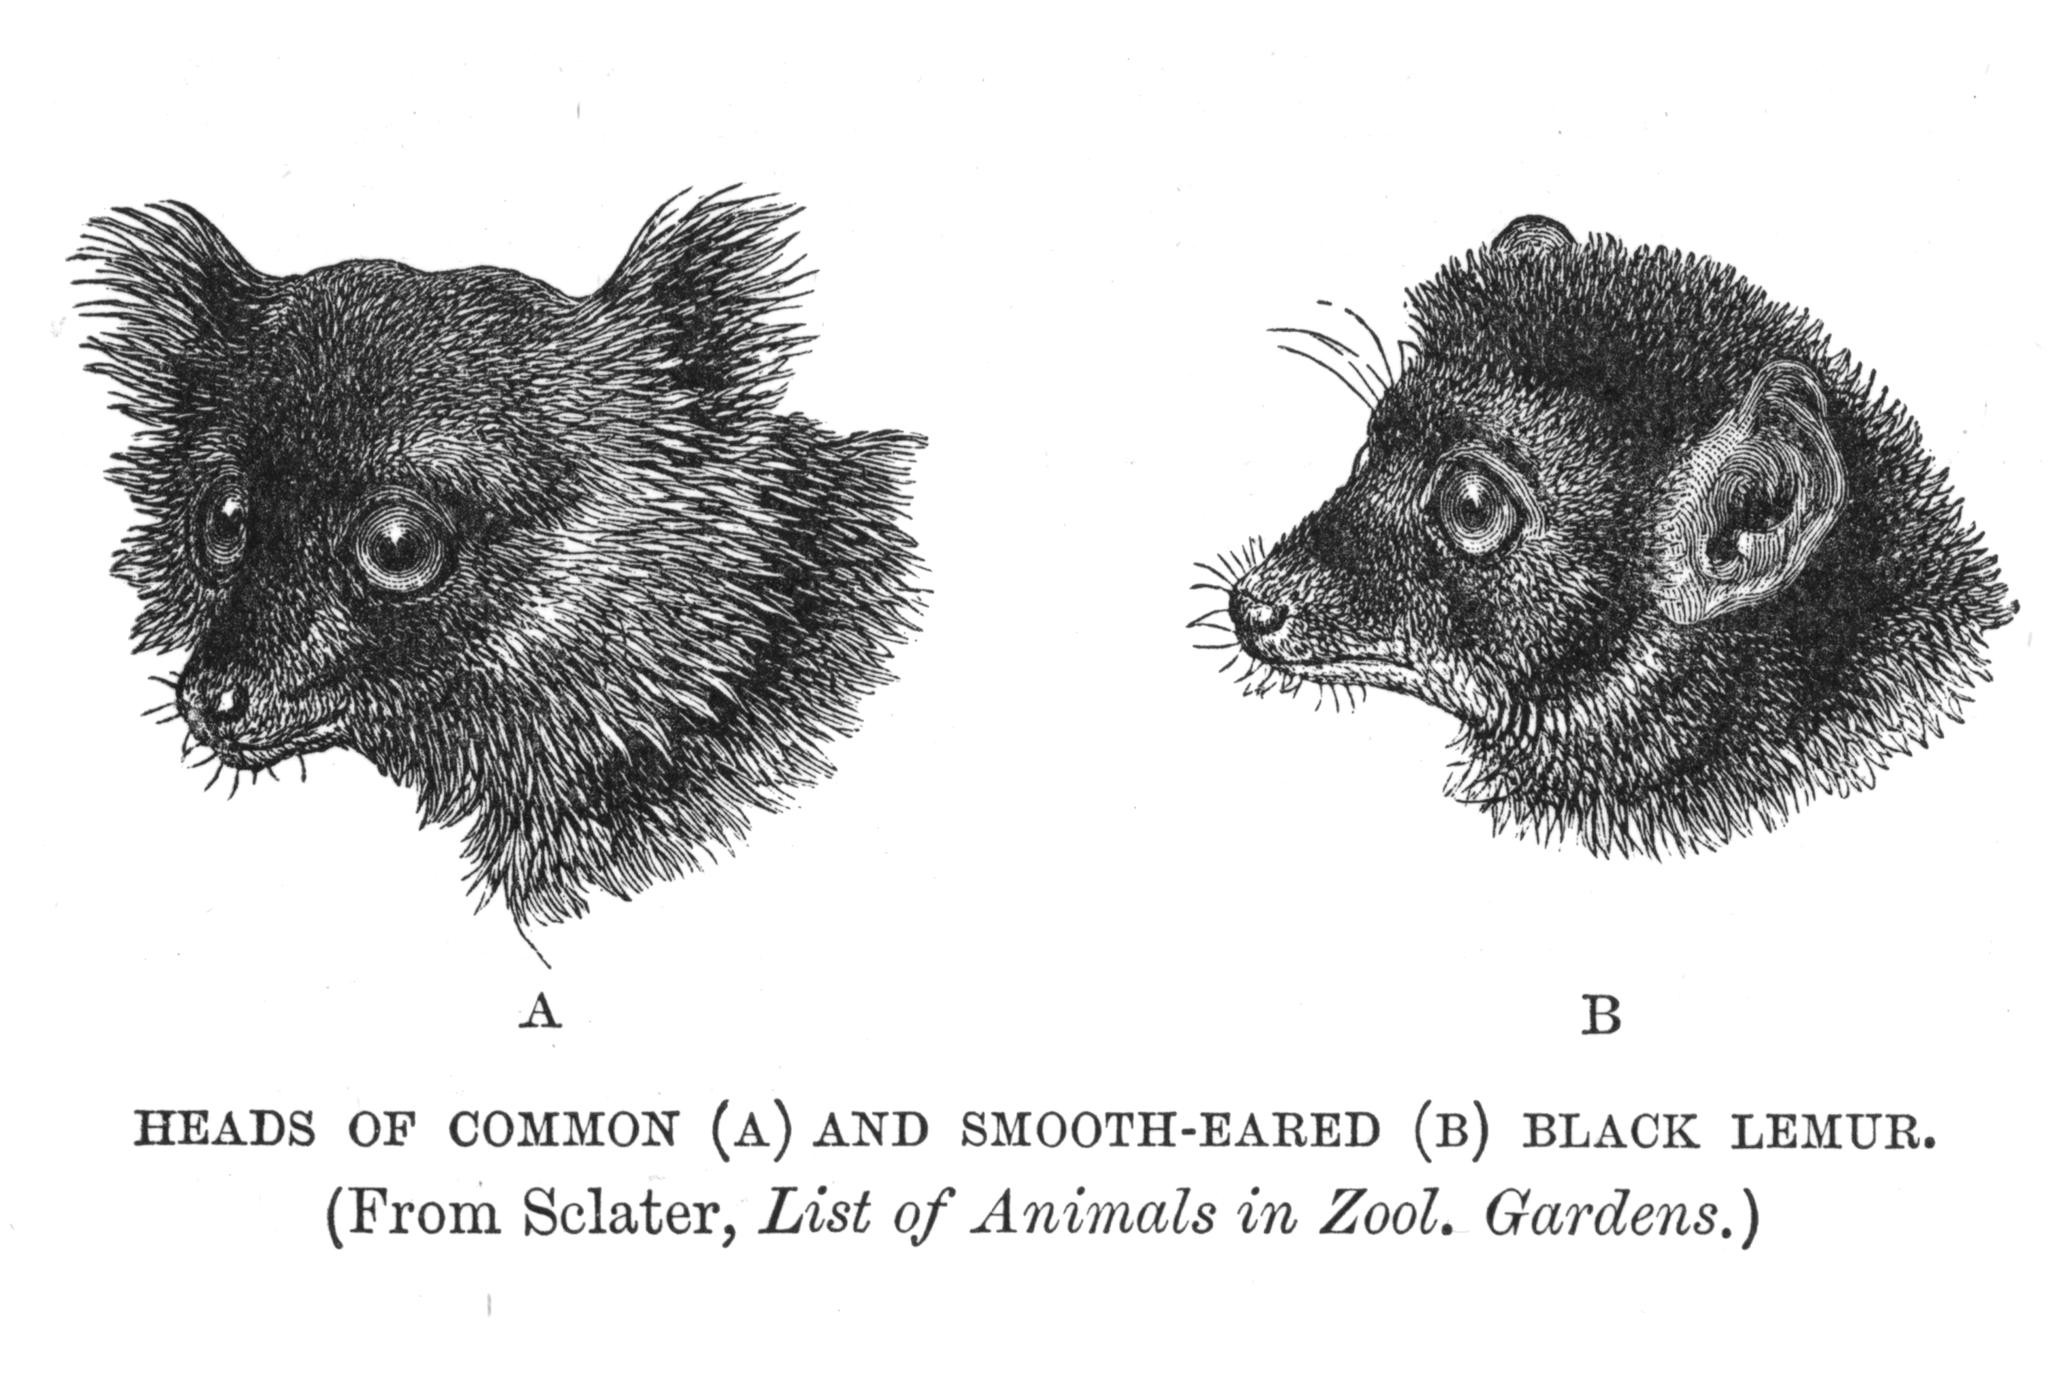 Heads of Common (A) and Smooth-Eared (B) Black Lemur (From Sclater, List of  Animals in Zool. Gardens) - UWDC - UW-Madison Libraries